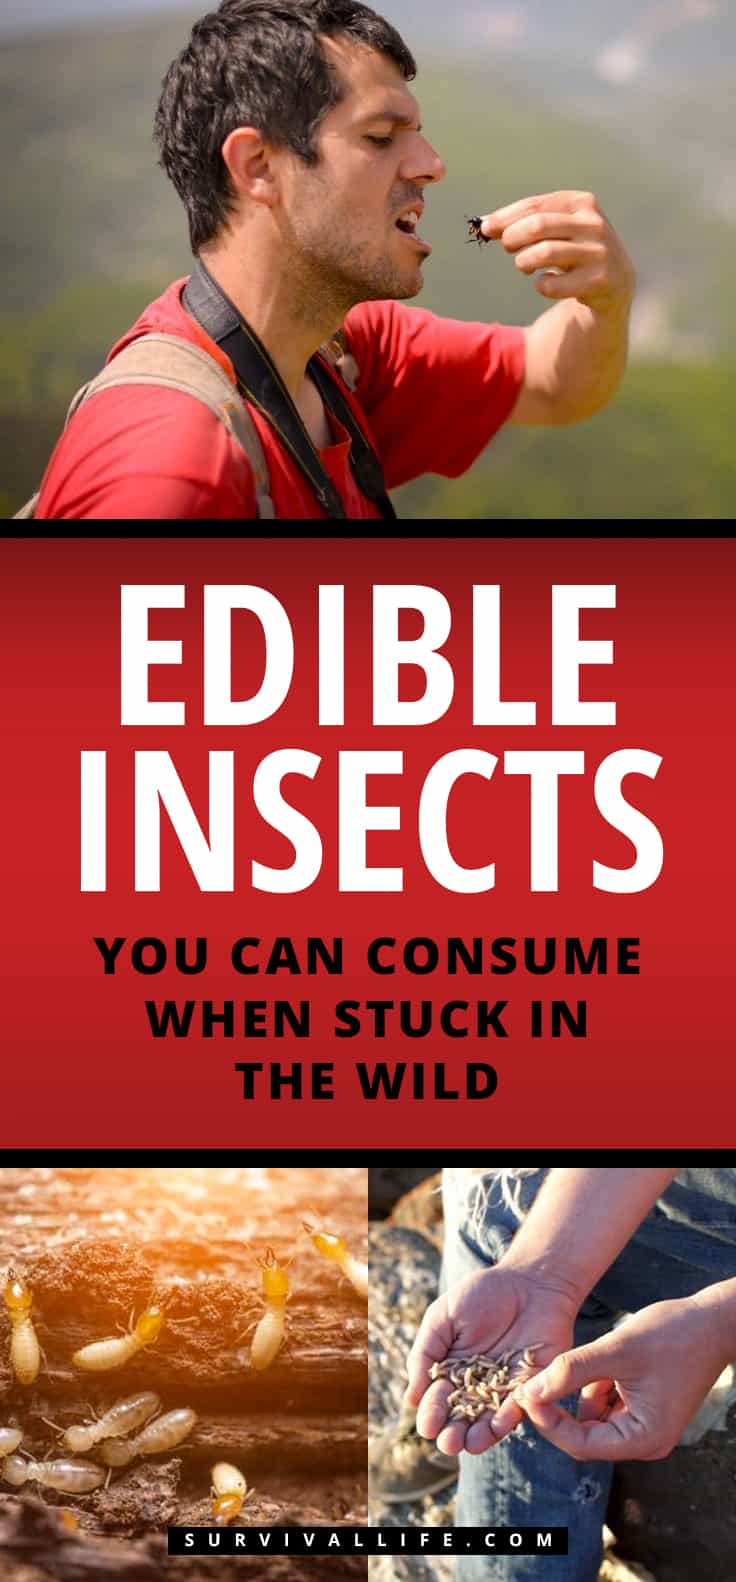 Edible Insects You Can Consume When Stuck In The Wild | https://survivallife.com/edible-insects/